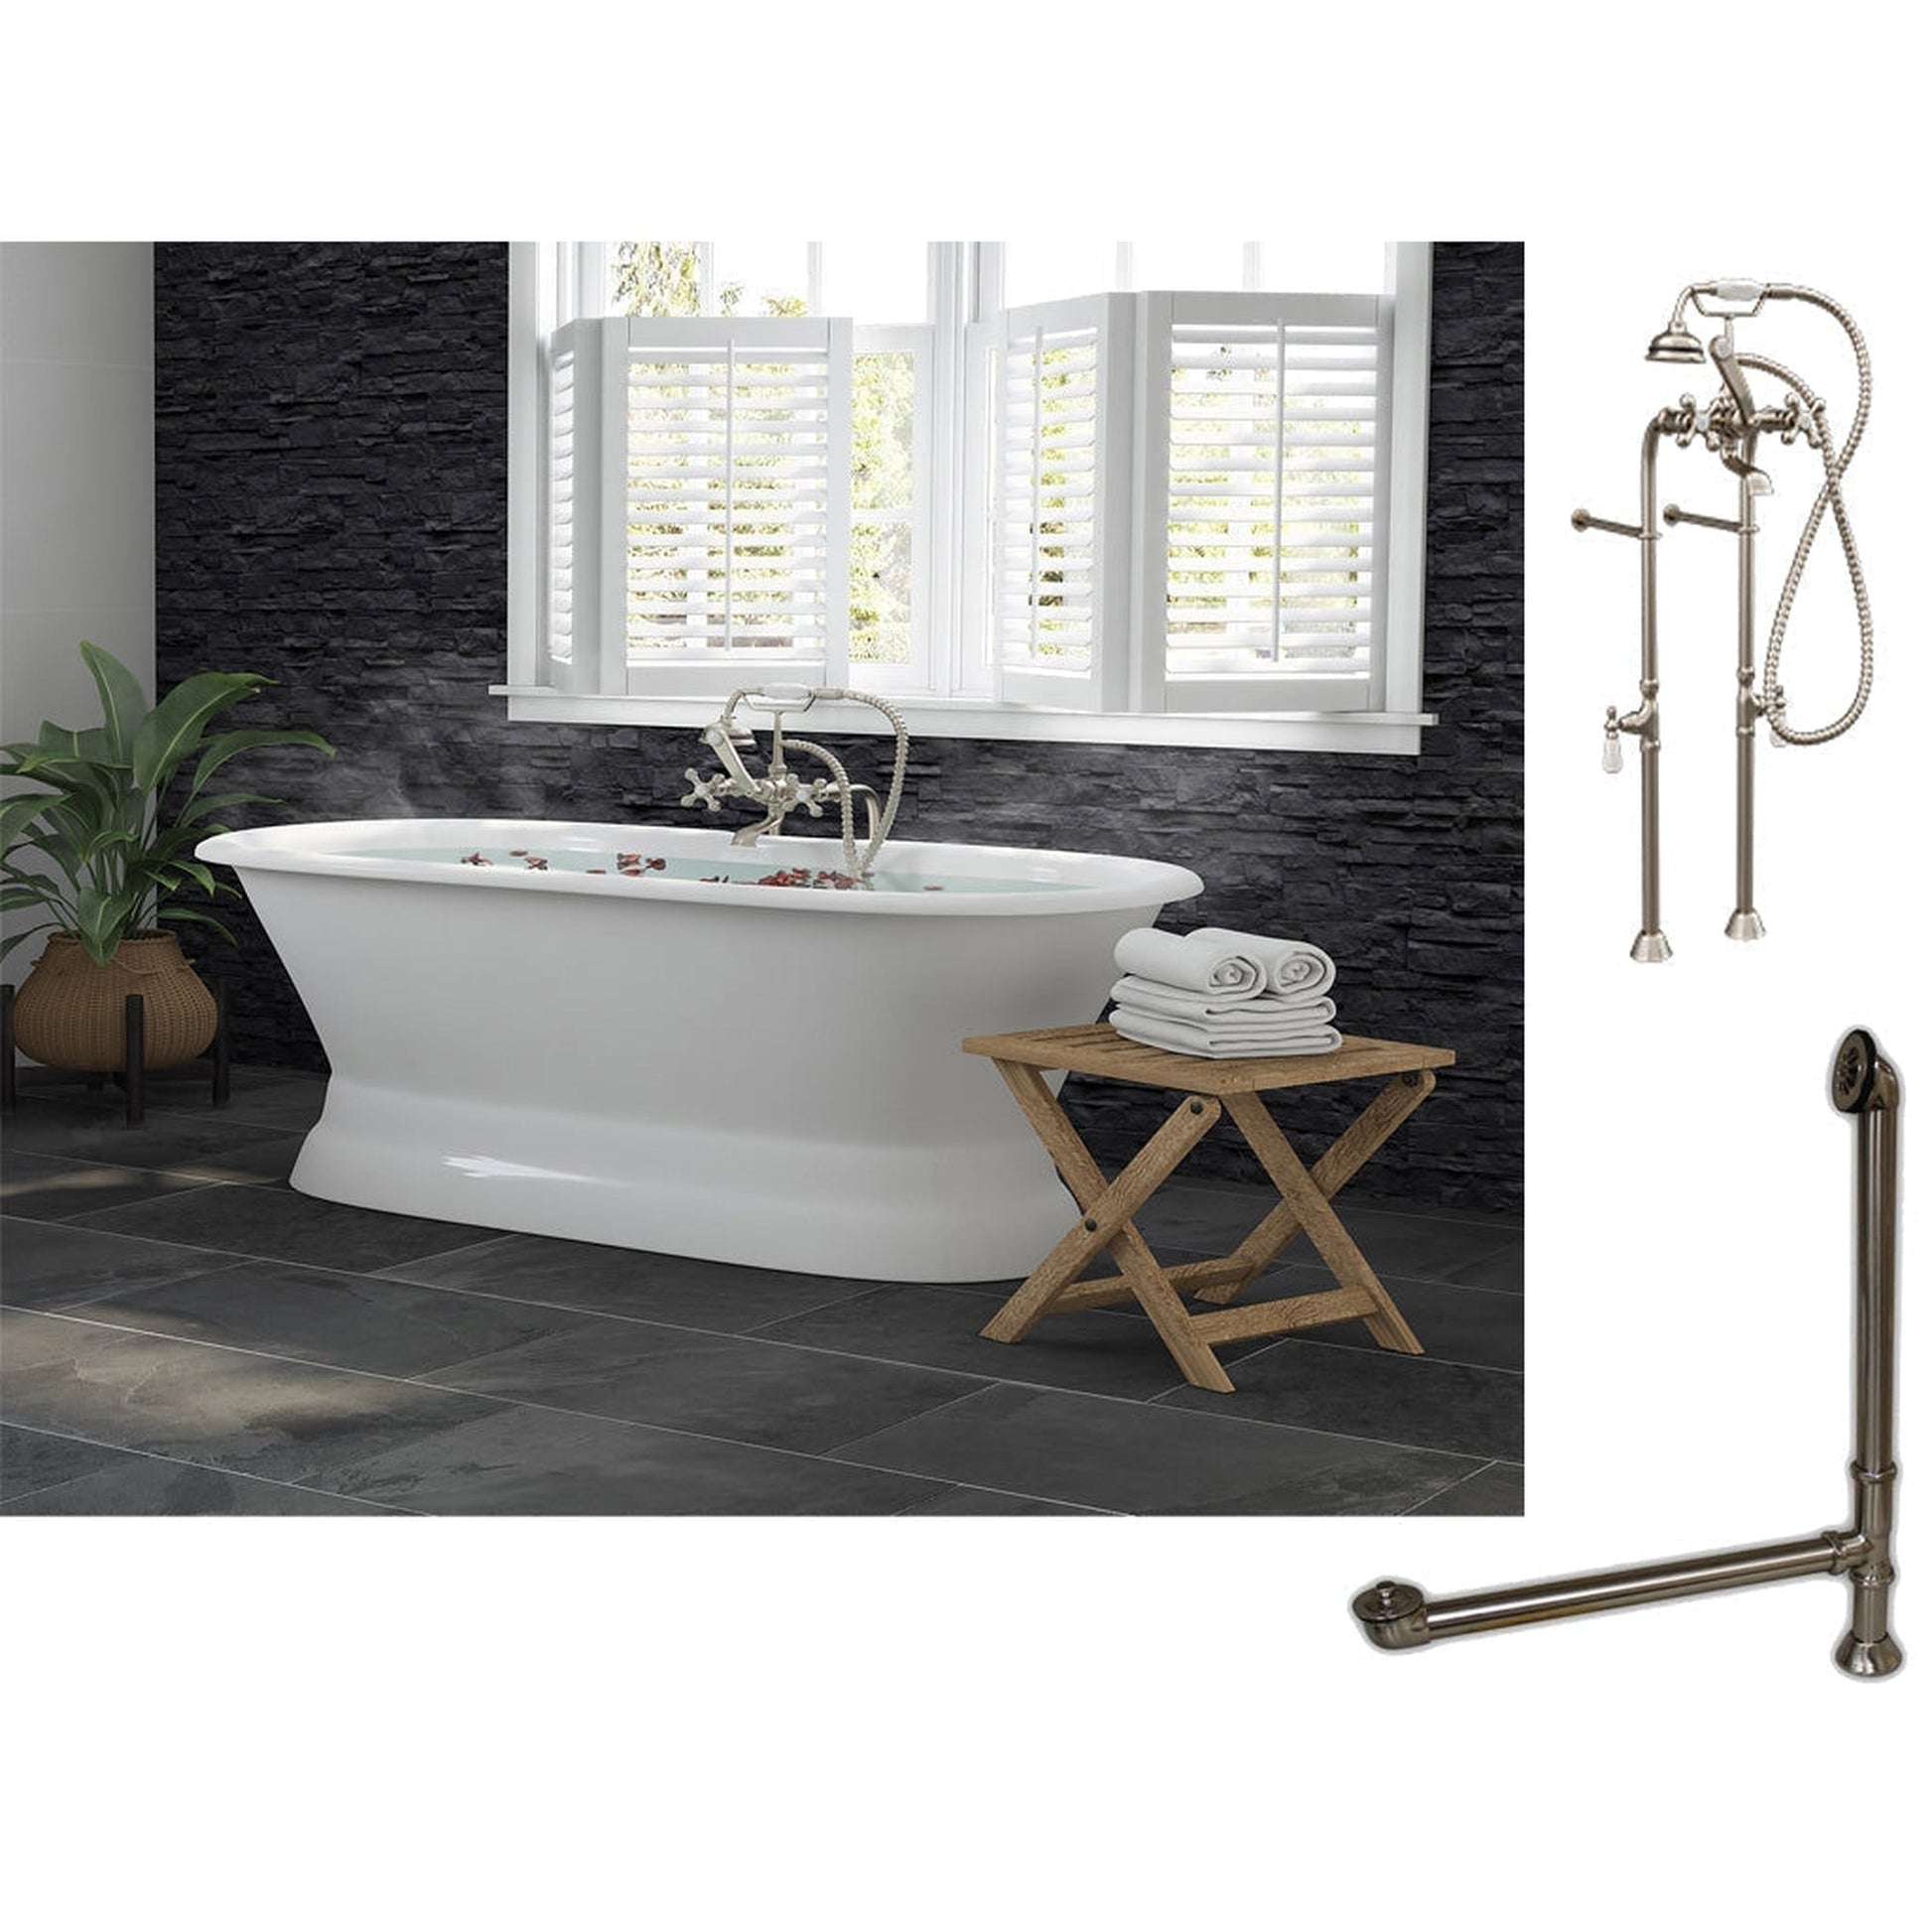 Cambridge Plumbing 60" White Cast Iron Double Ended Pedestal Bathtub With No Deck Holes And Complete Plumbing Package Including Floor Mounted British Telephone Faucet, Drain And Overflow Assembly In Brushed Nickel